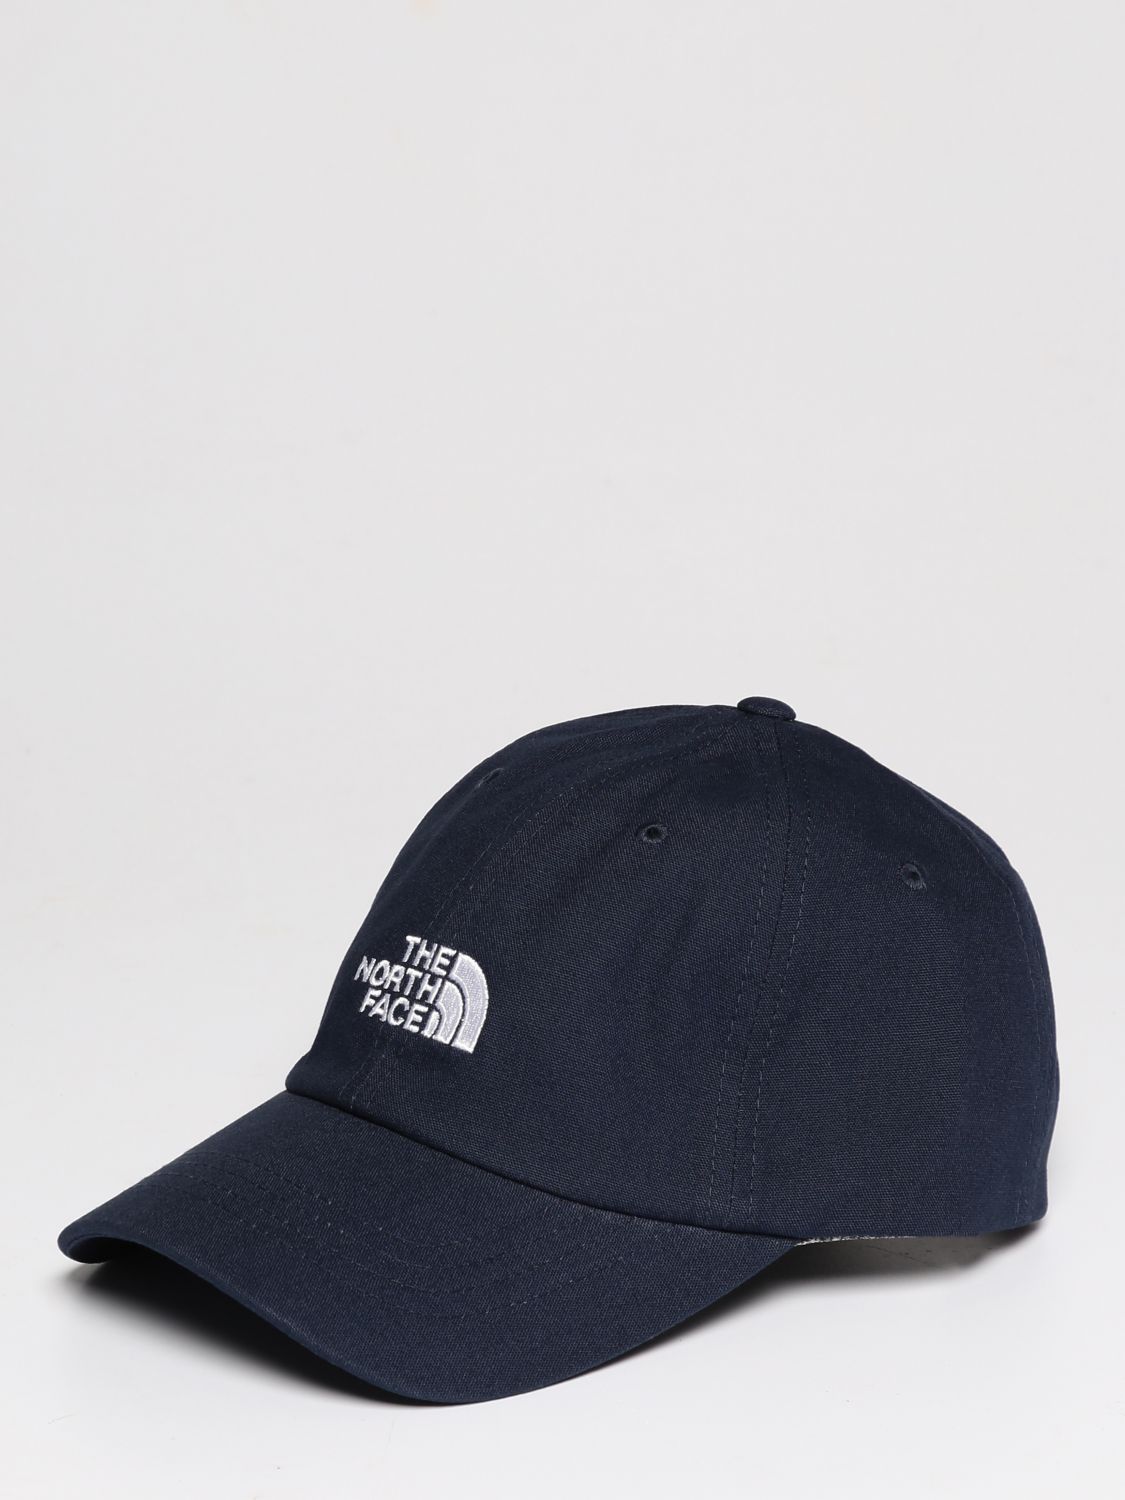 Hut The North Face: The North Face Herren Hut navy 1